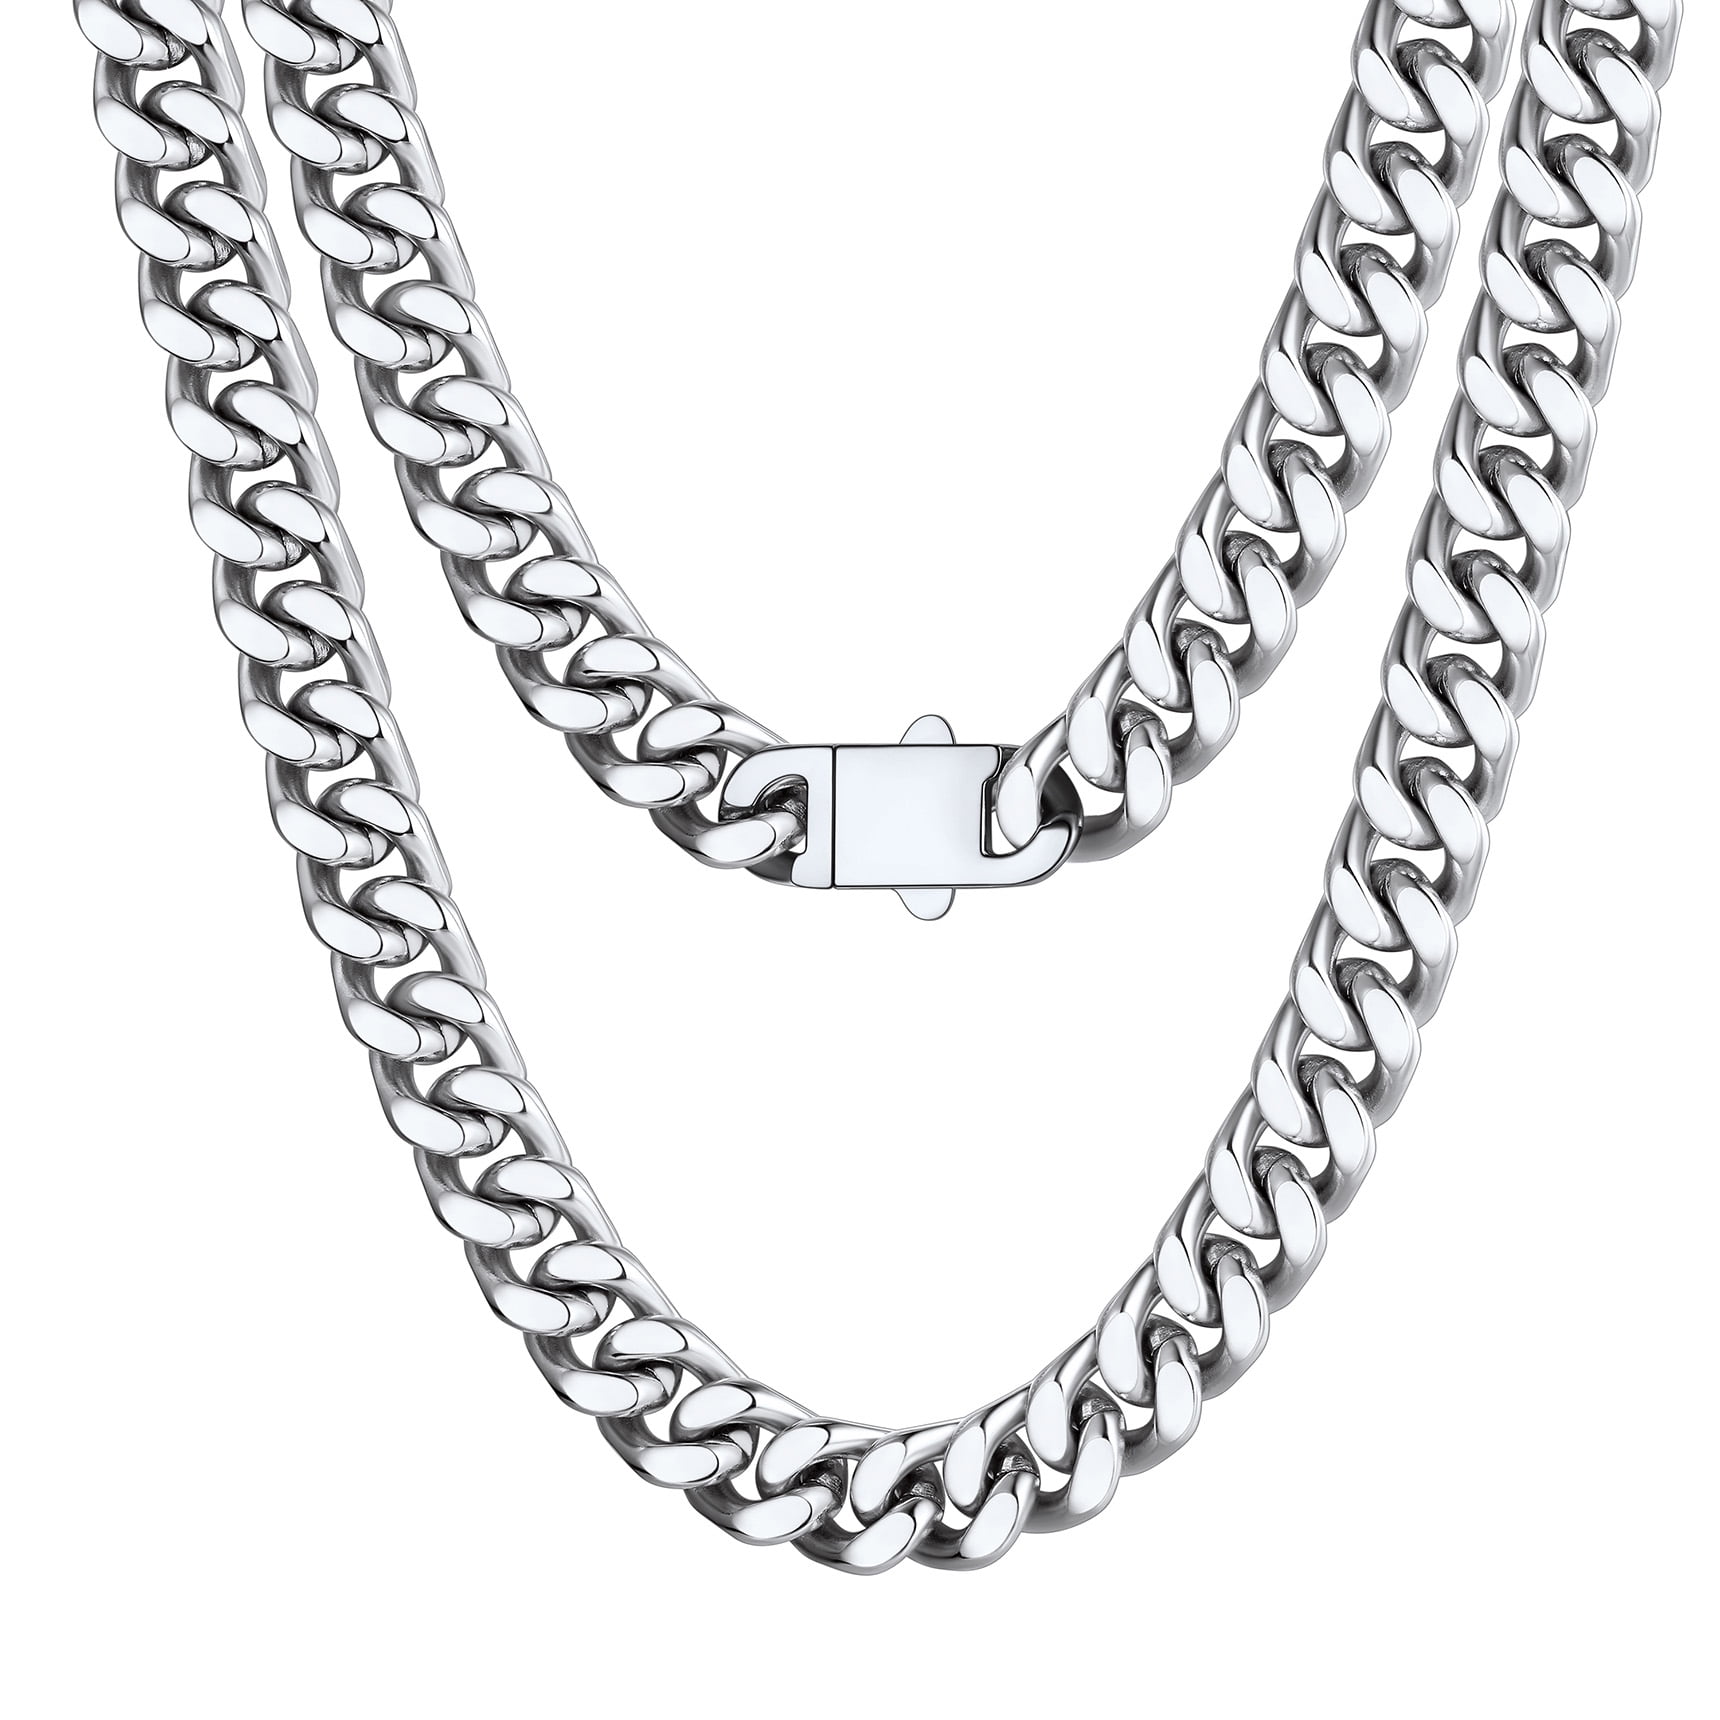 Big Stainless Steel Chain For Jewelry Making Heavy Chunky Necklace